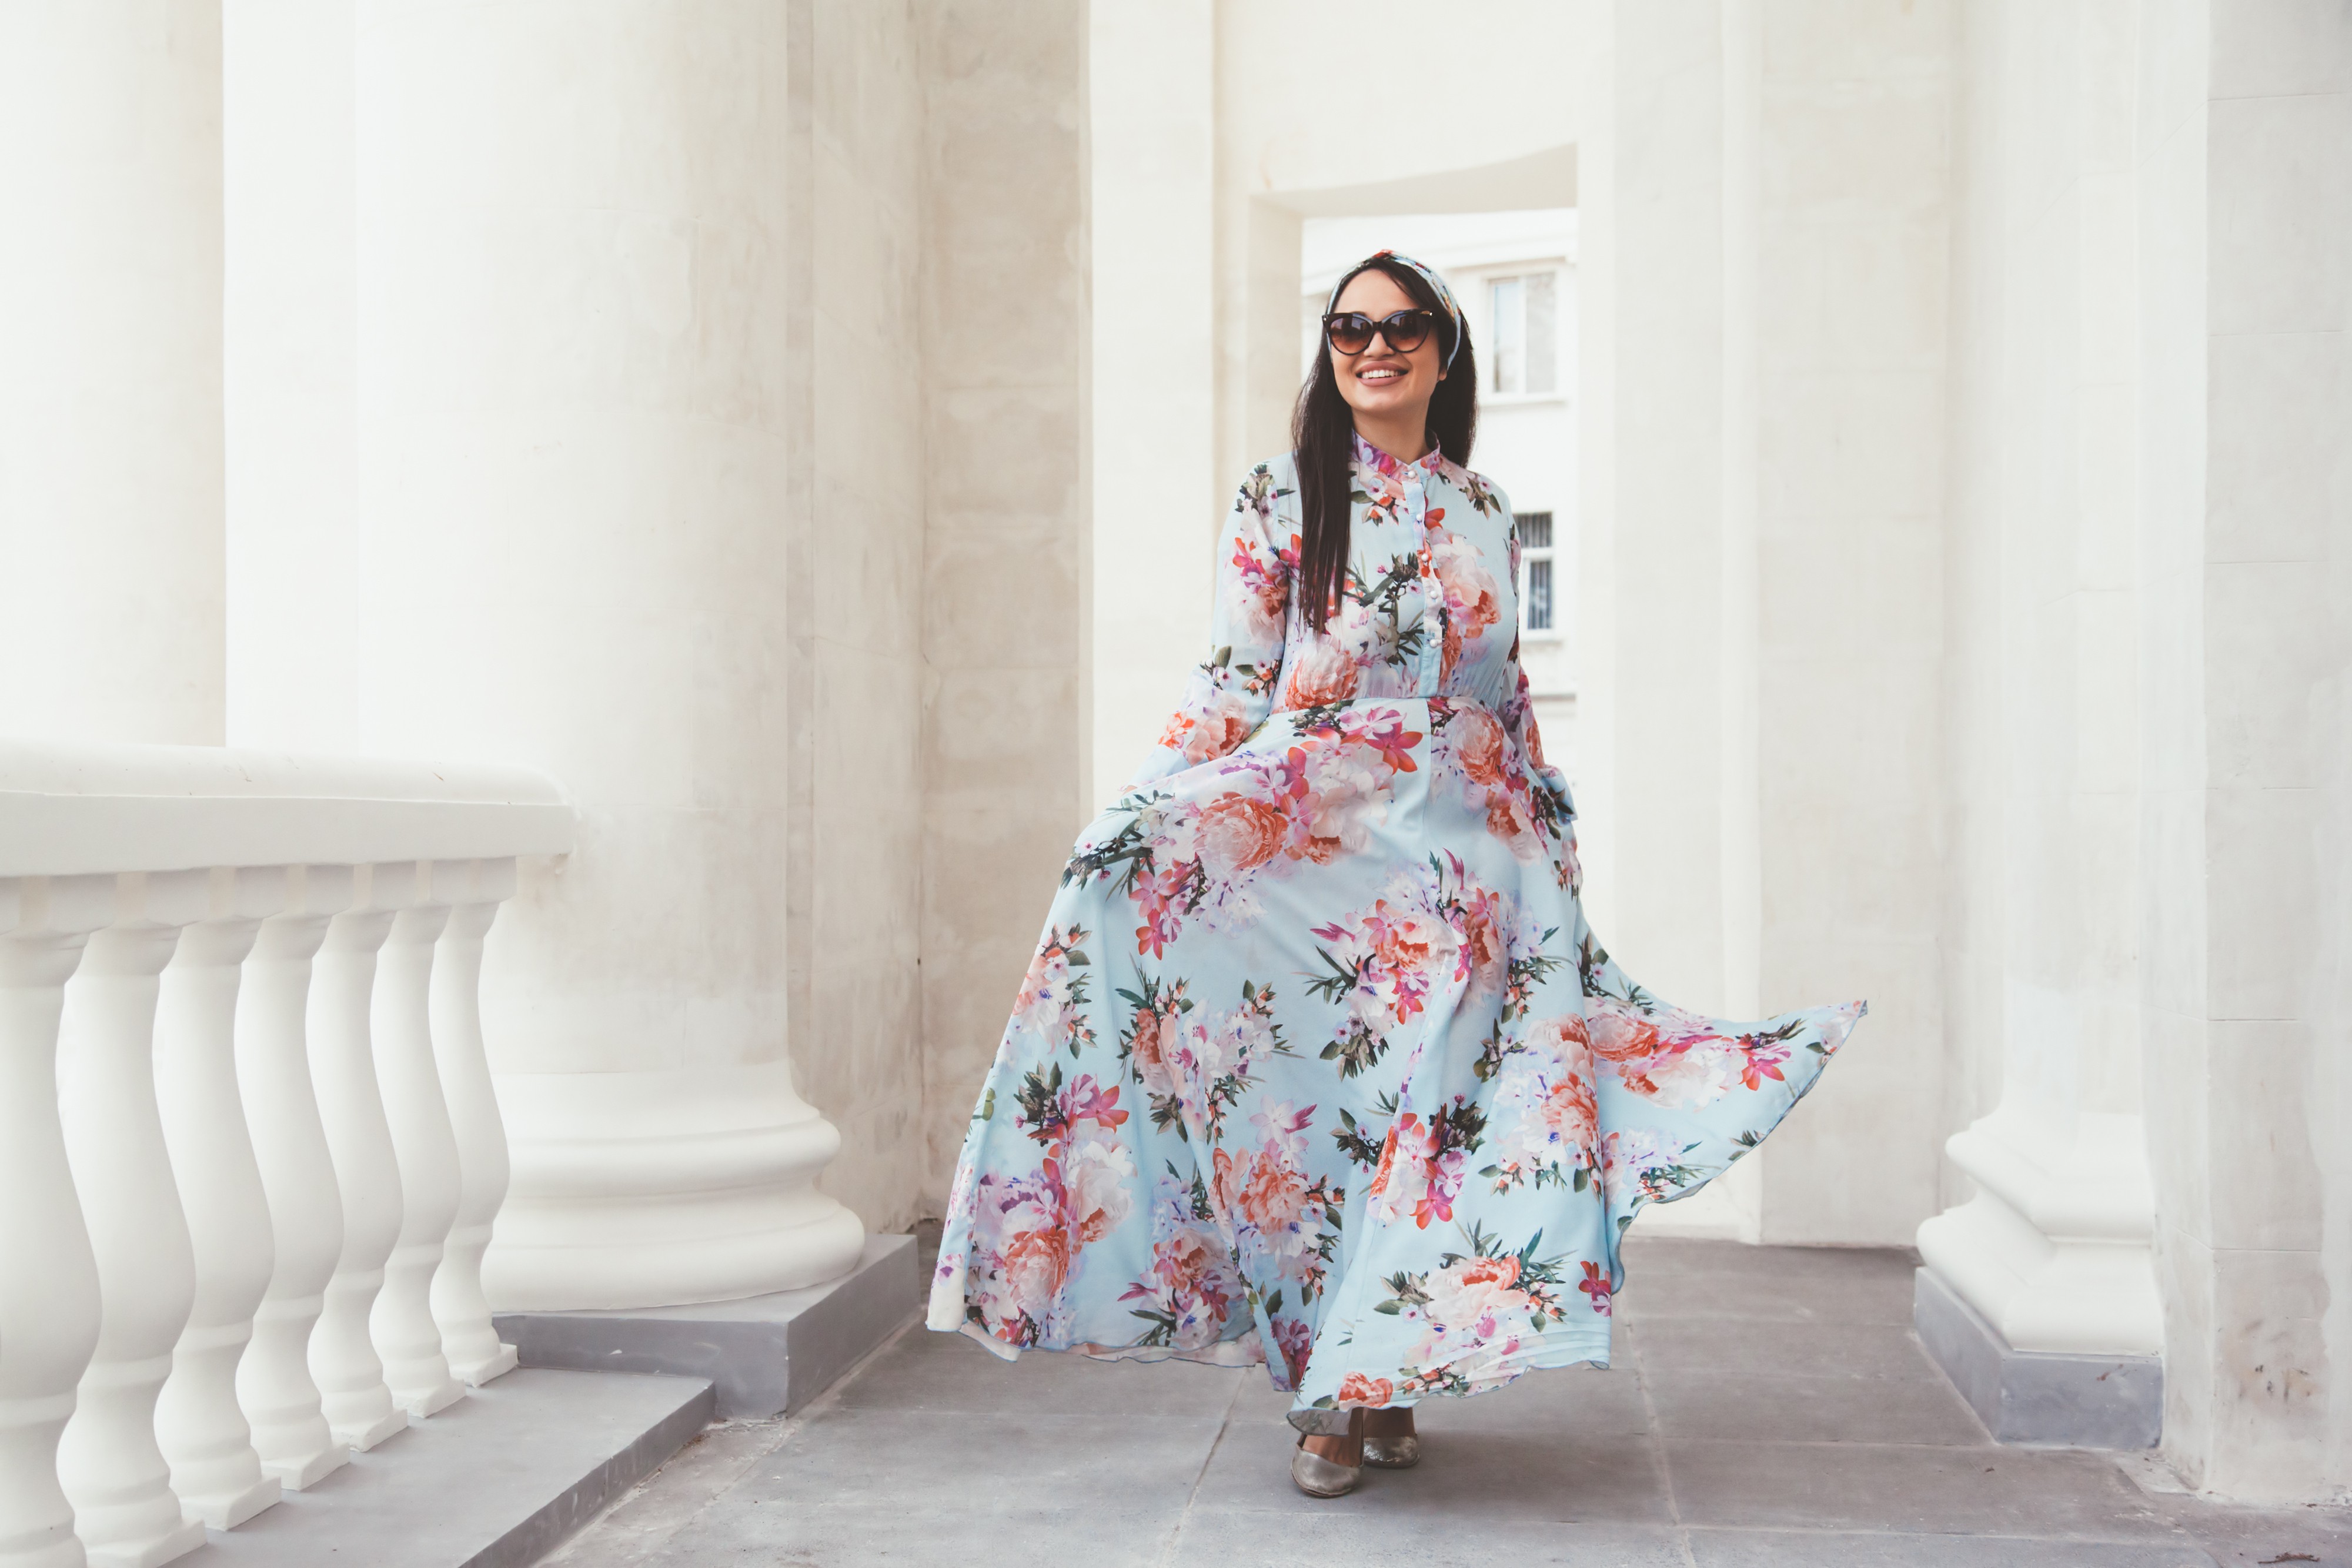 Long-sleeved floral maxi dresses are as winter wedding-appropriate as their short-sleeved counterparts.